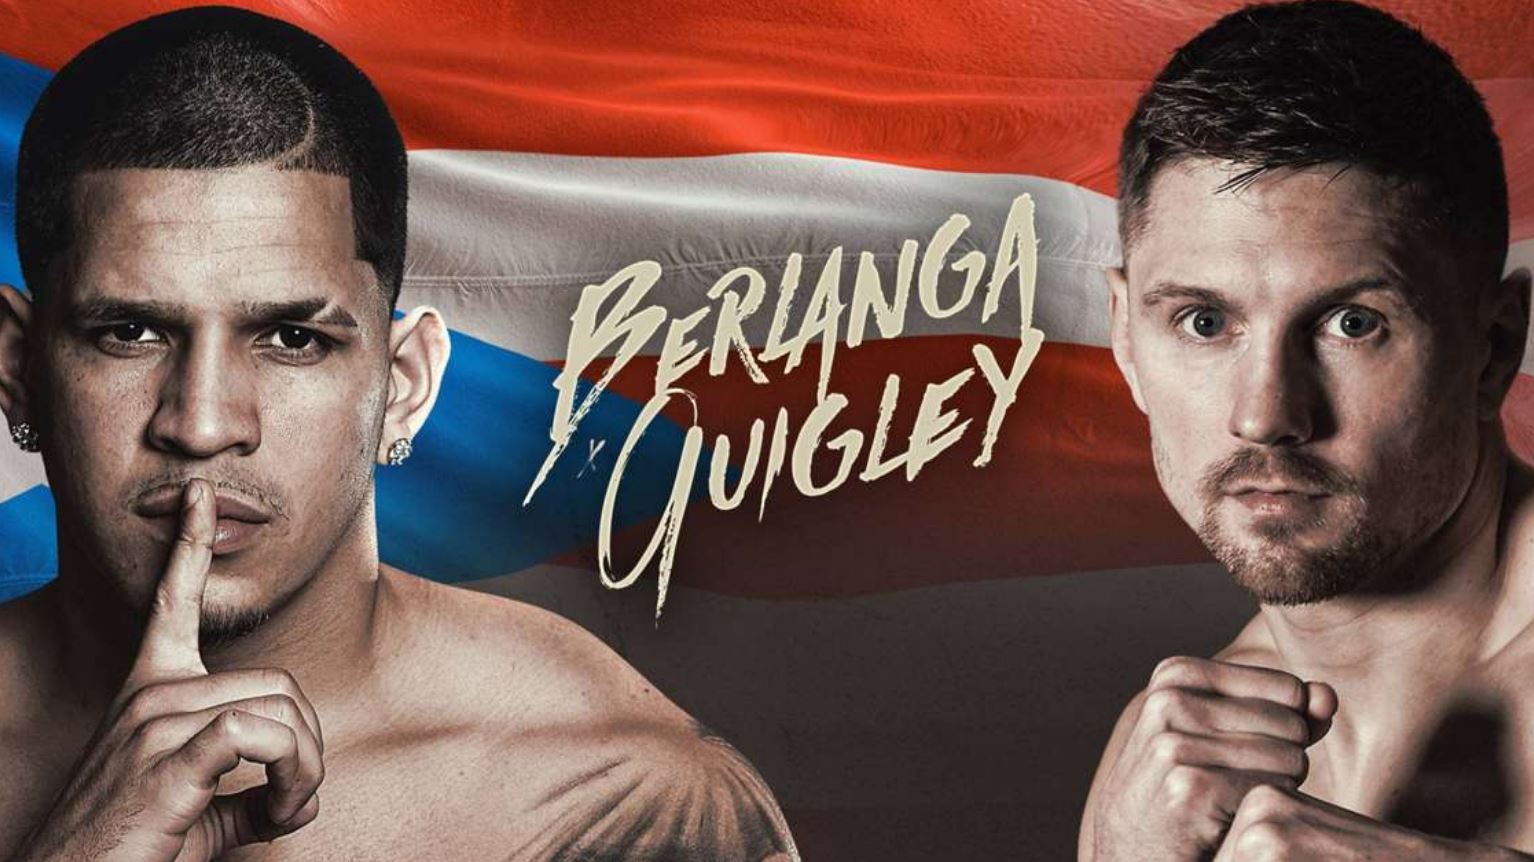 Berlanga vs Quigley live stream How to watch the boxing match Digital Trends